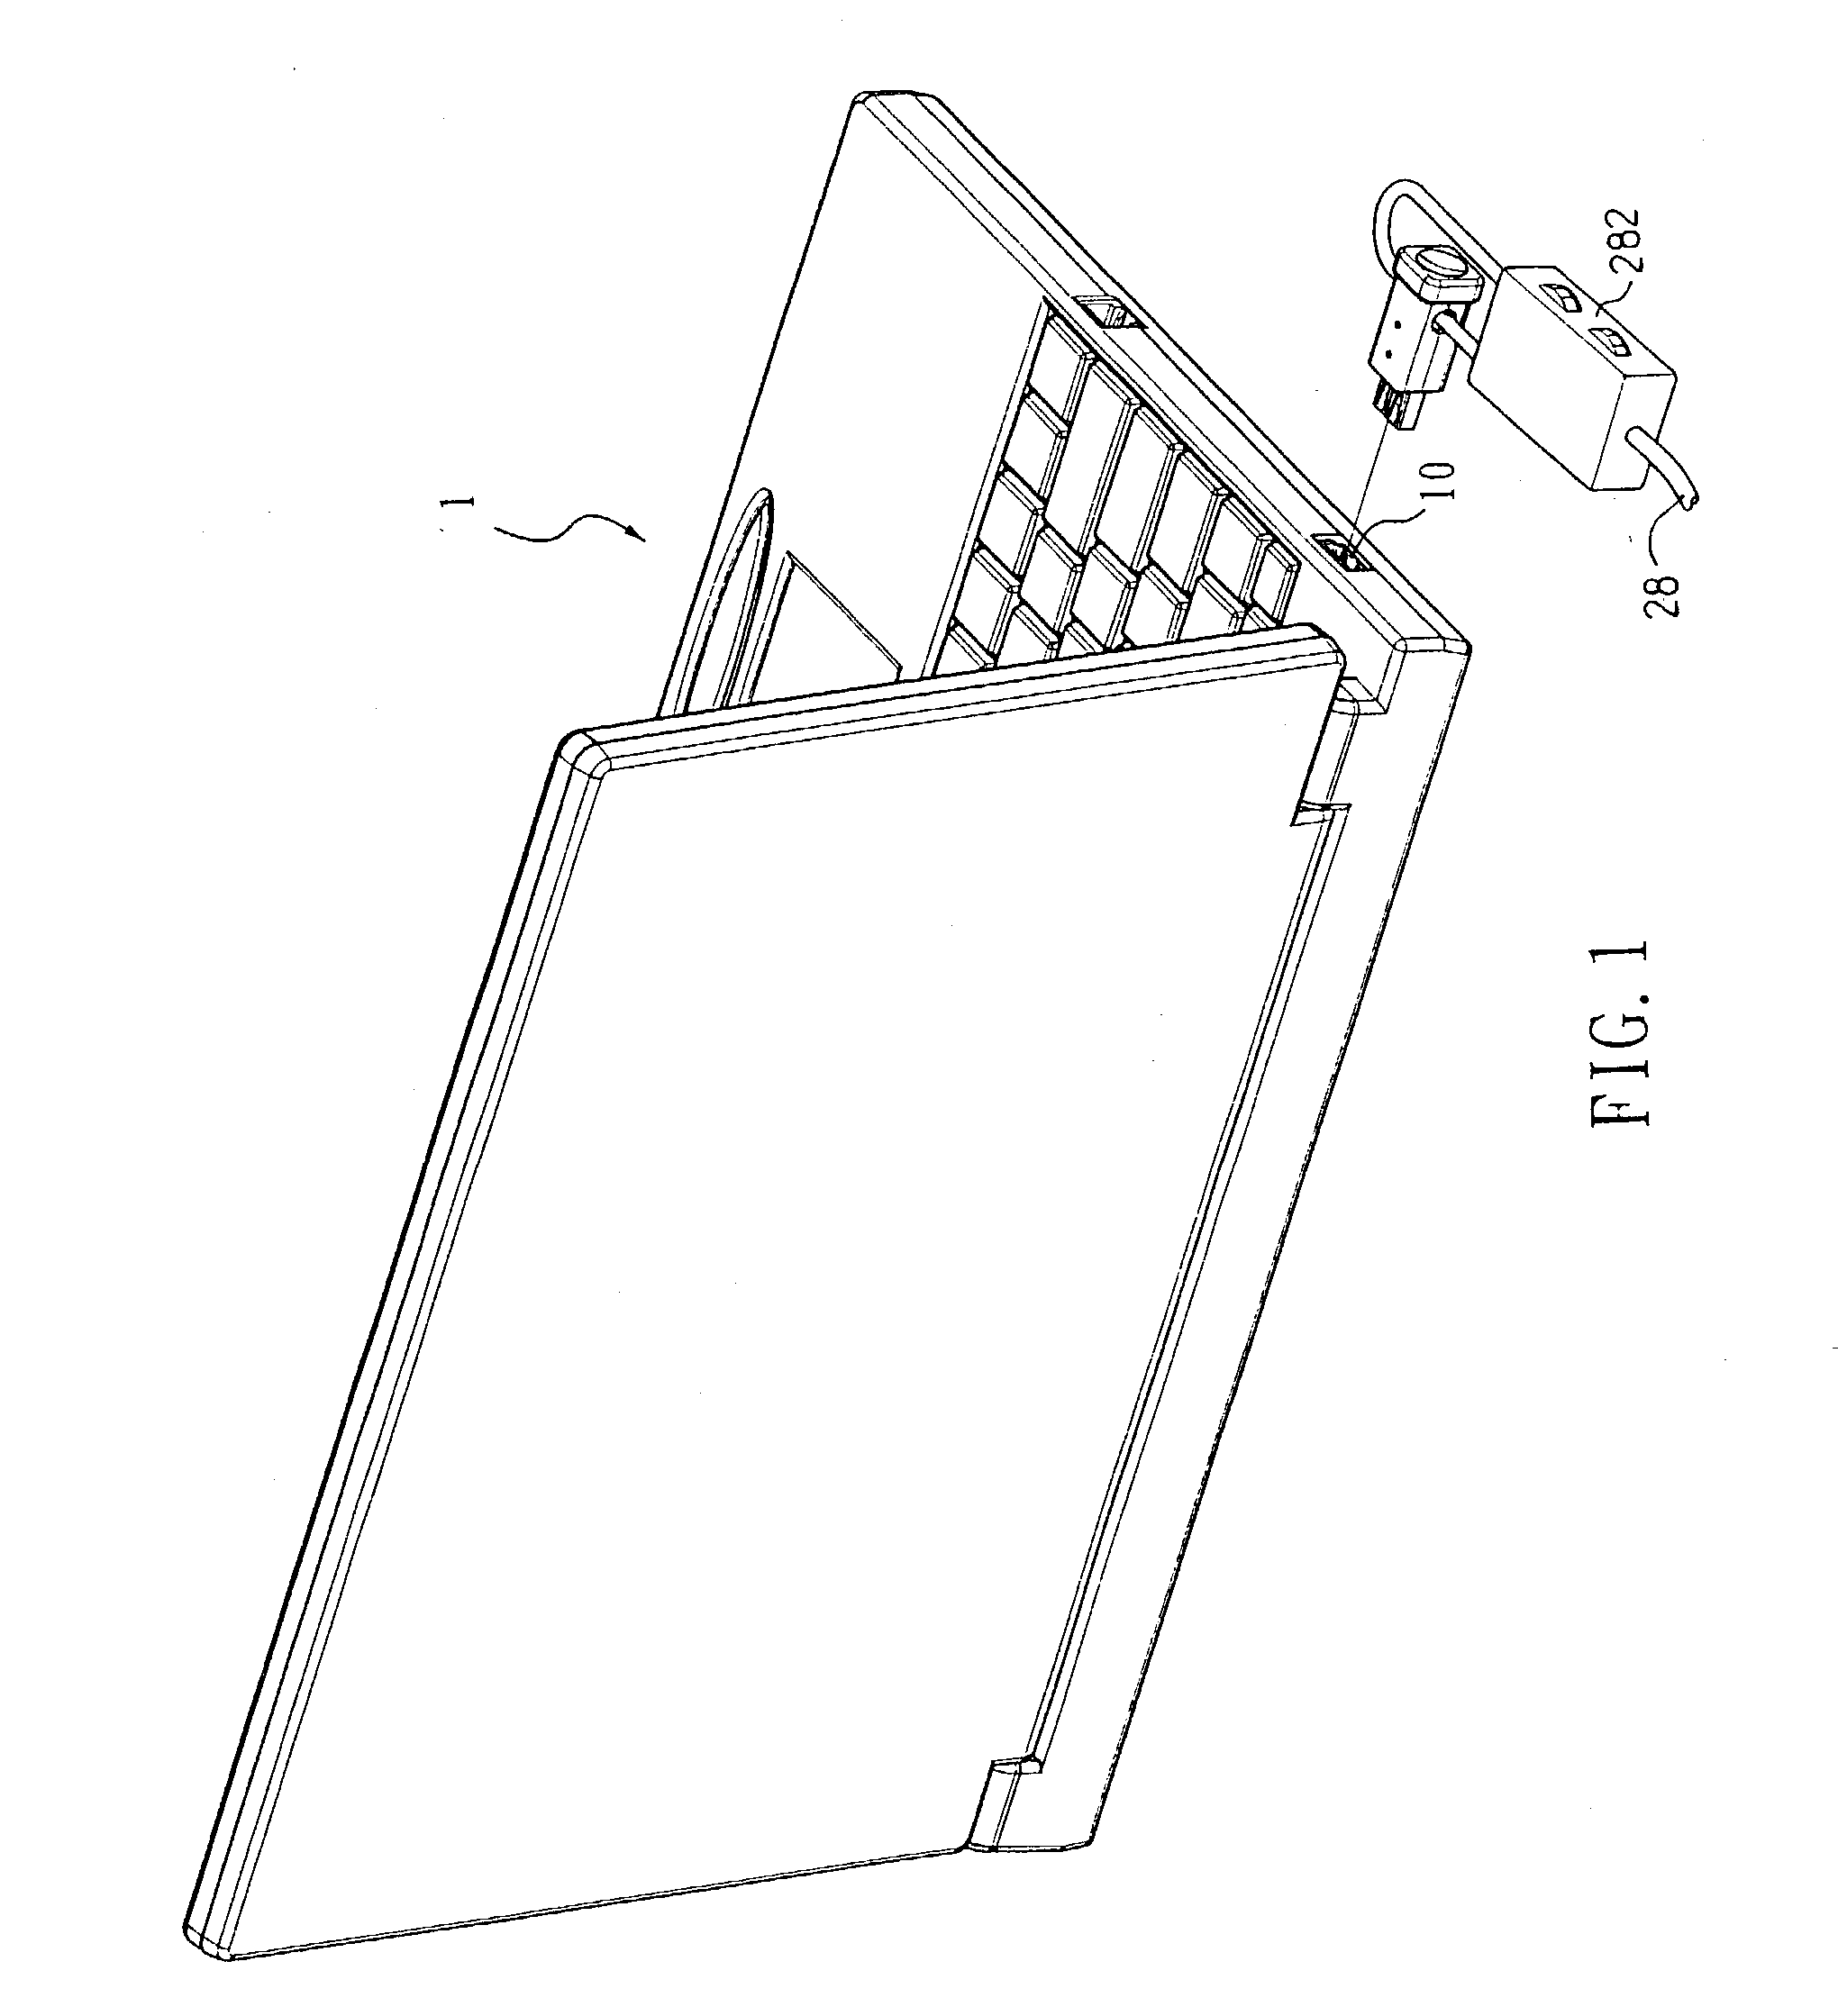 Plug socket securing device for use with plug socket having a slot formed by a resilient tab